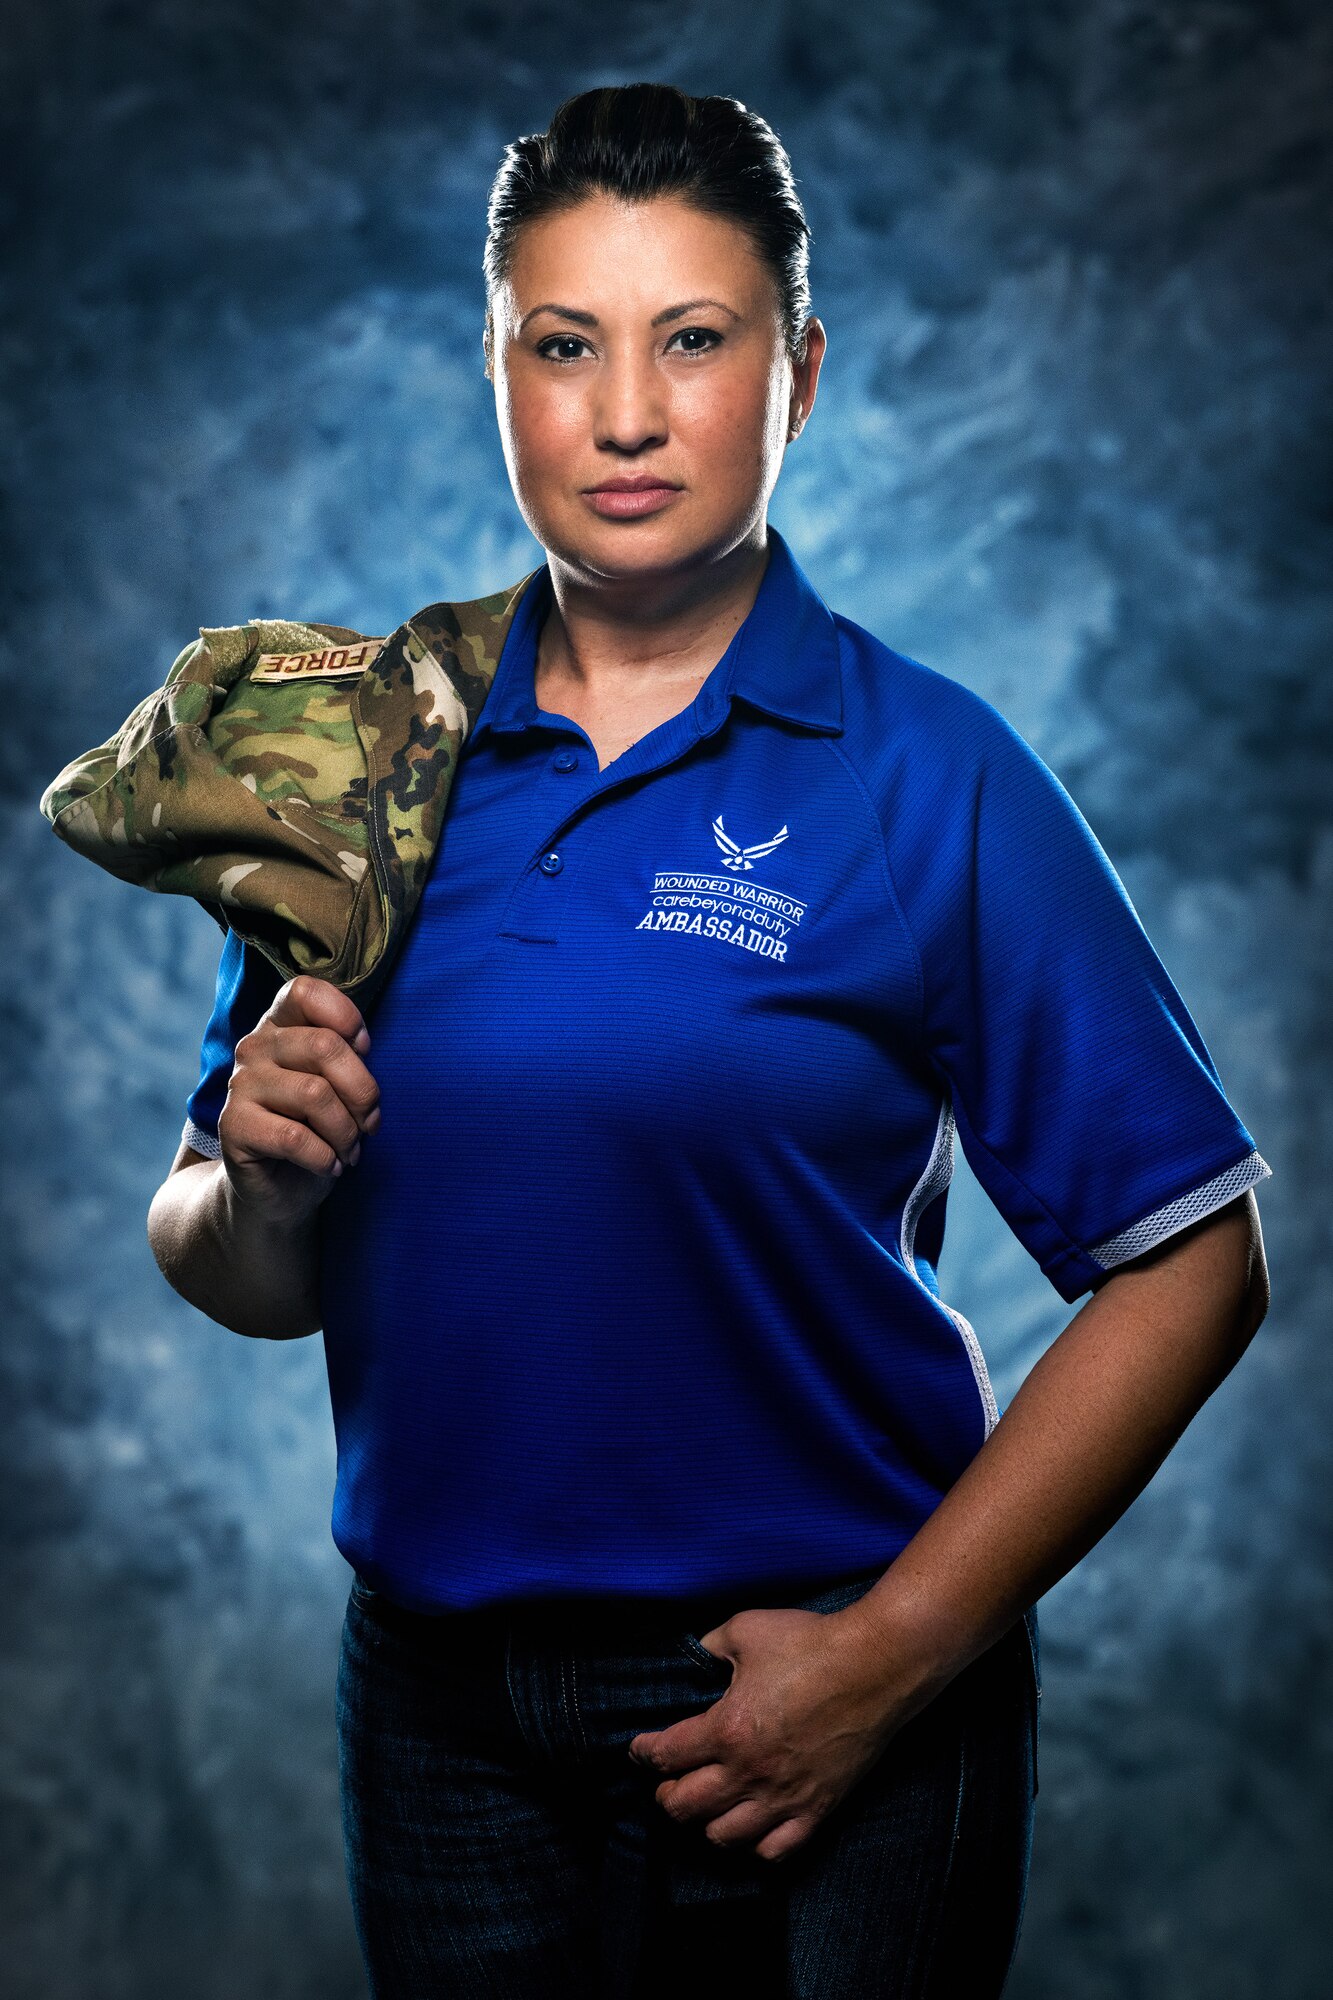 Master Sgt. Bronwen Gulledge, 26th Space Aggressor Squadron, Adversary Intelligence Flight, flight superintendent, poses in her Air Force Wounded Warrior Program ambassador shirt, Feb. 19, at  Schriever Air Force Base, Colorado.